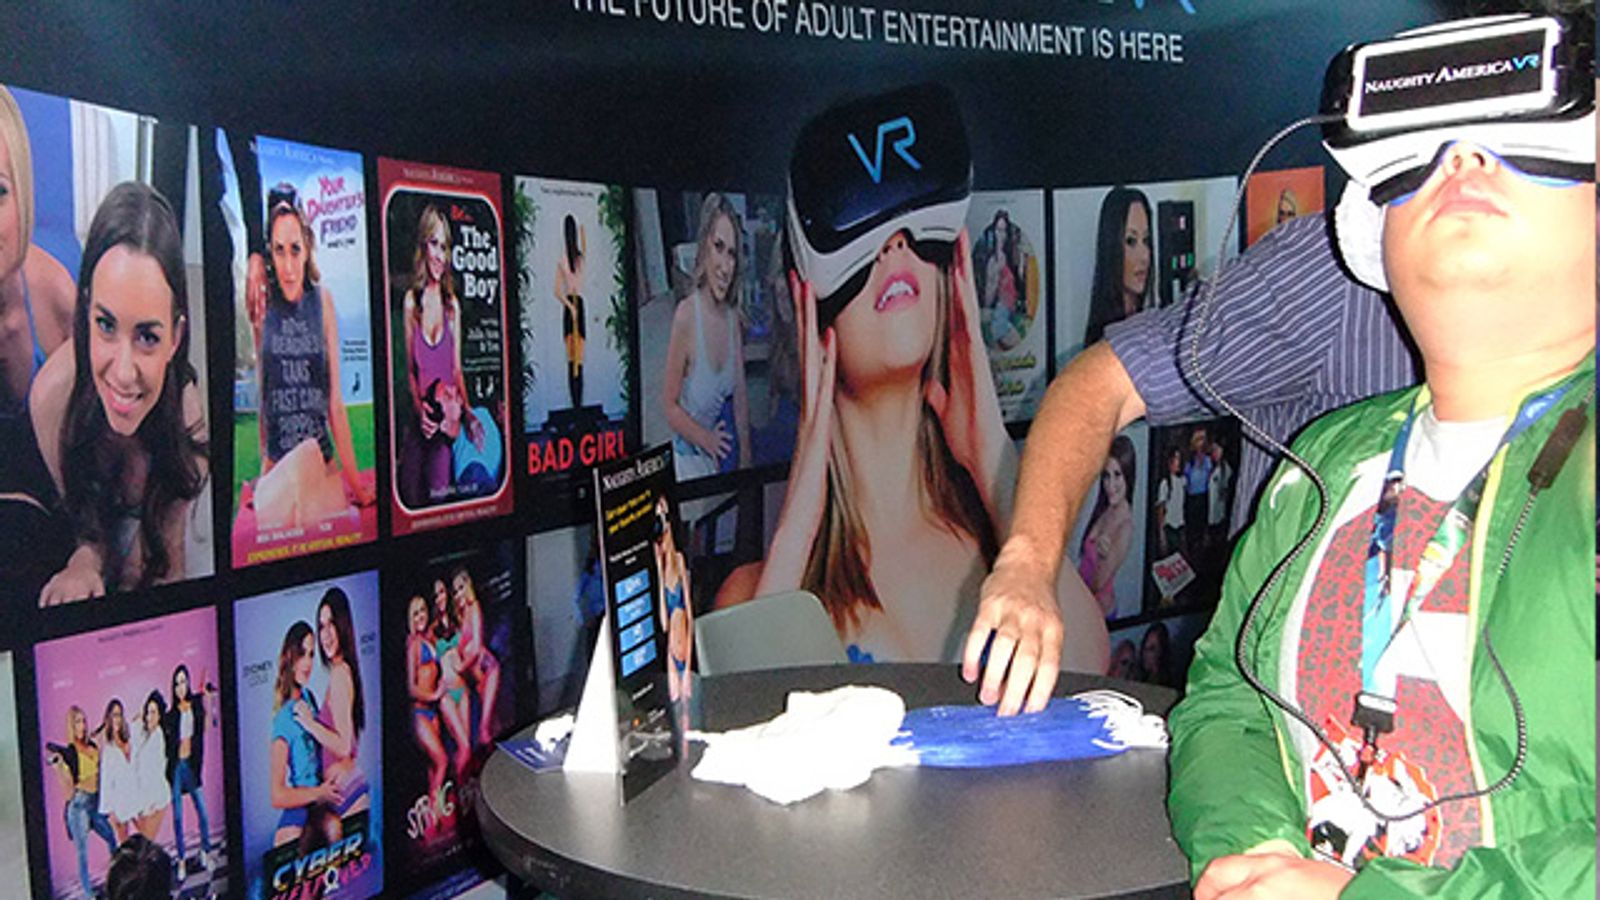 At E3, Naughty America Is The Choice for Adult VR